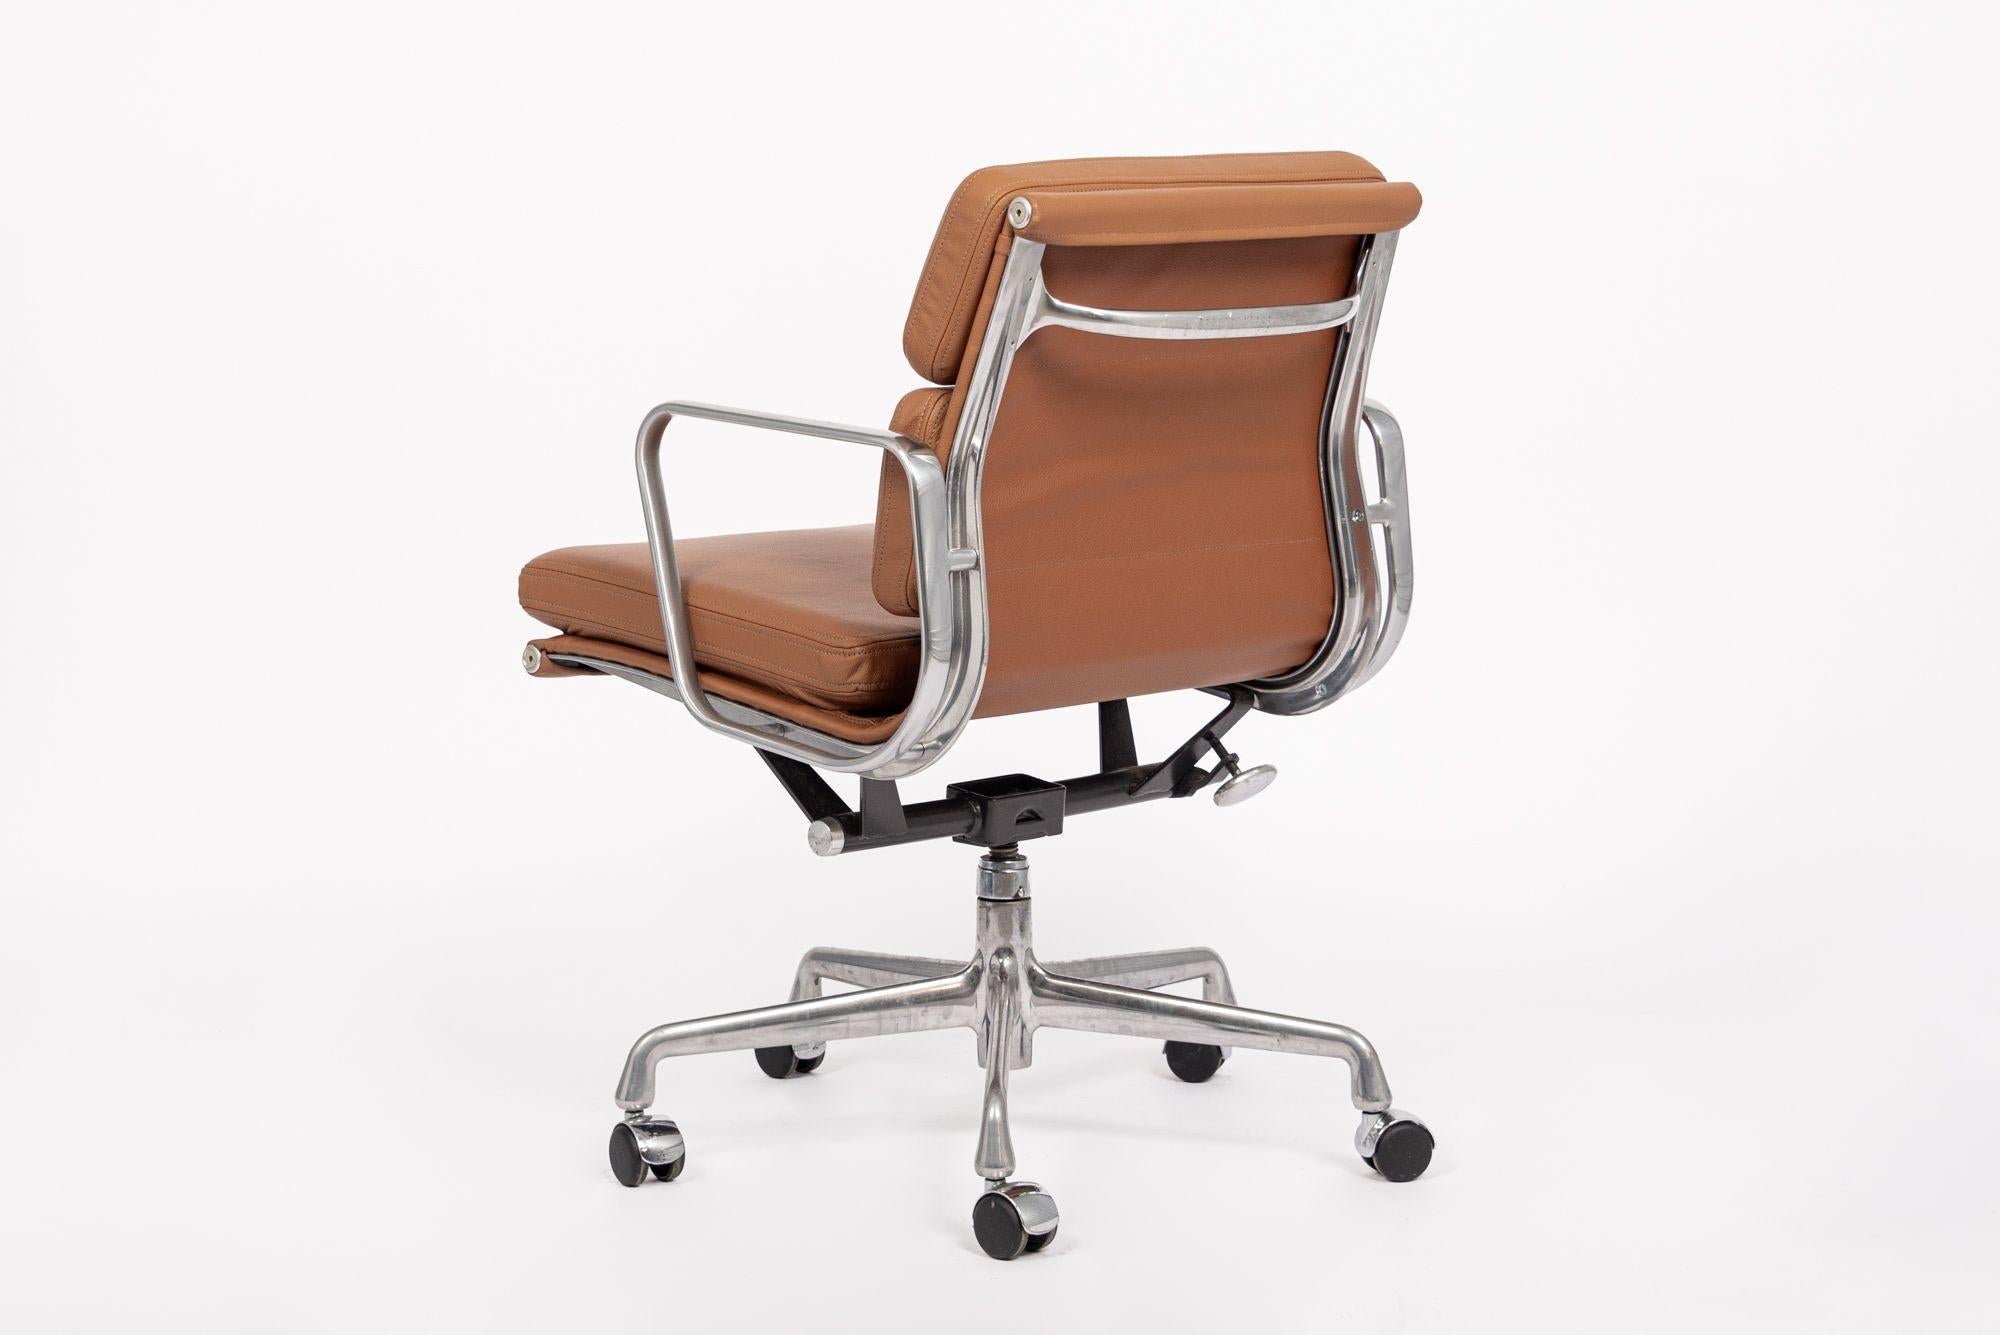 Eames Herman Miller Brown Leather Desk Chair Soft Pad 2000s In Good Condition For Sale In Detroit, MI